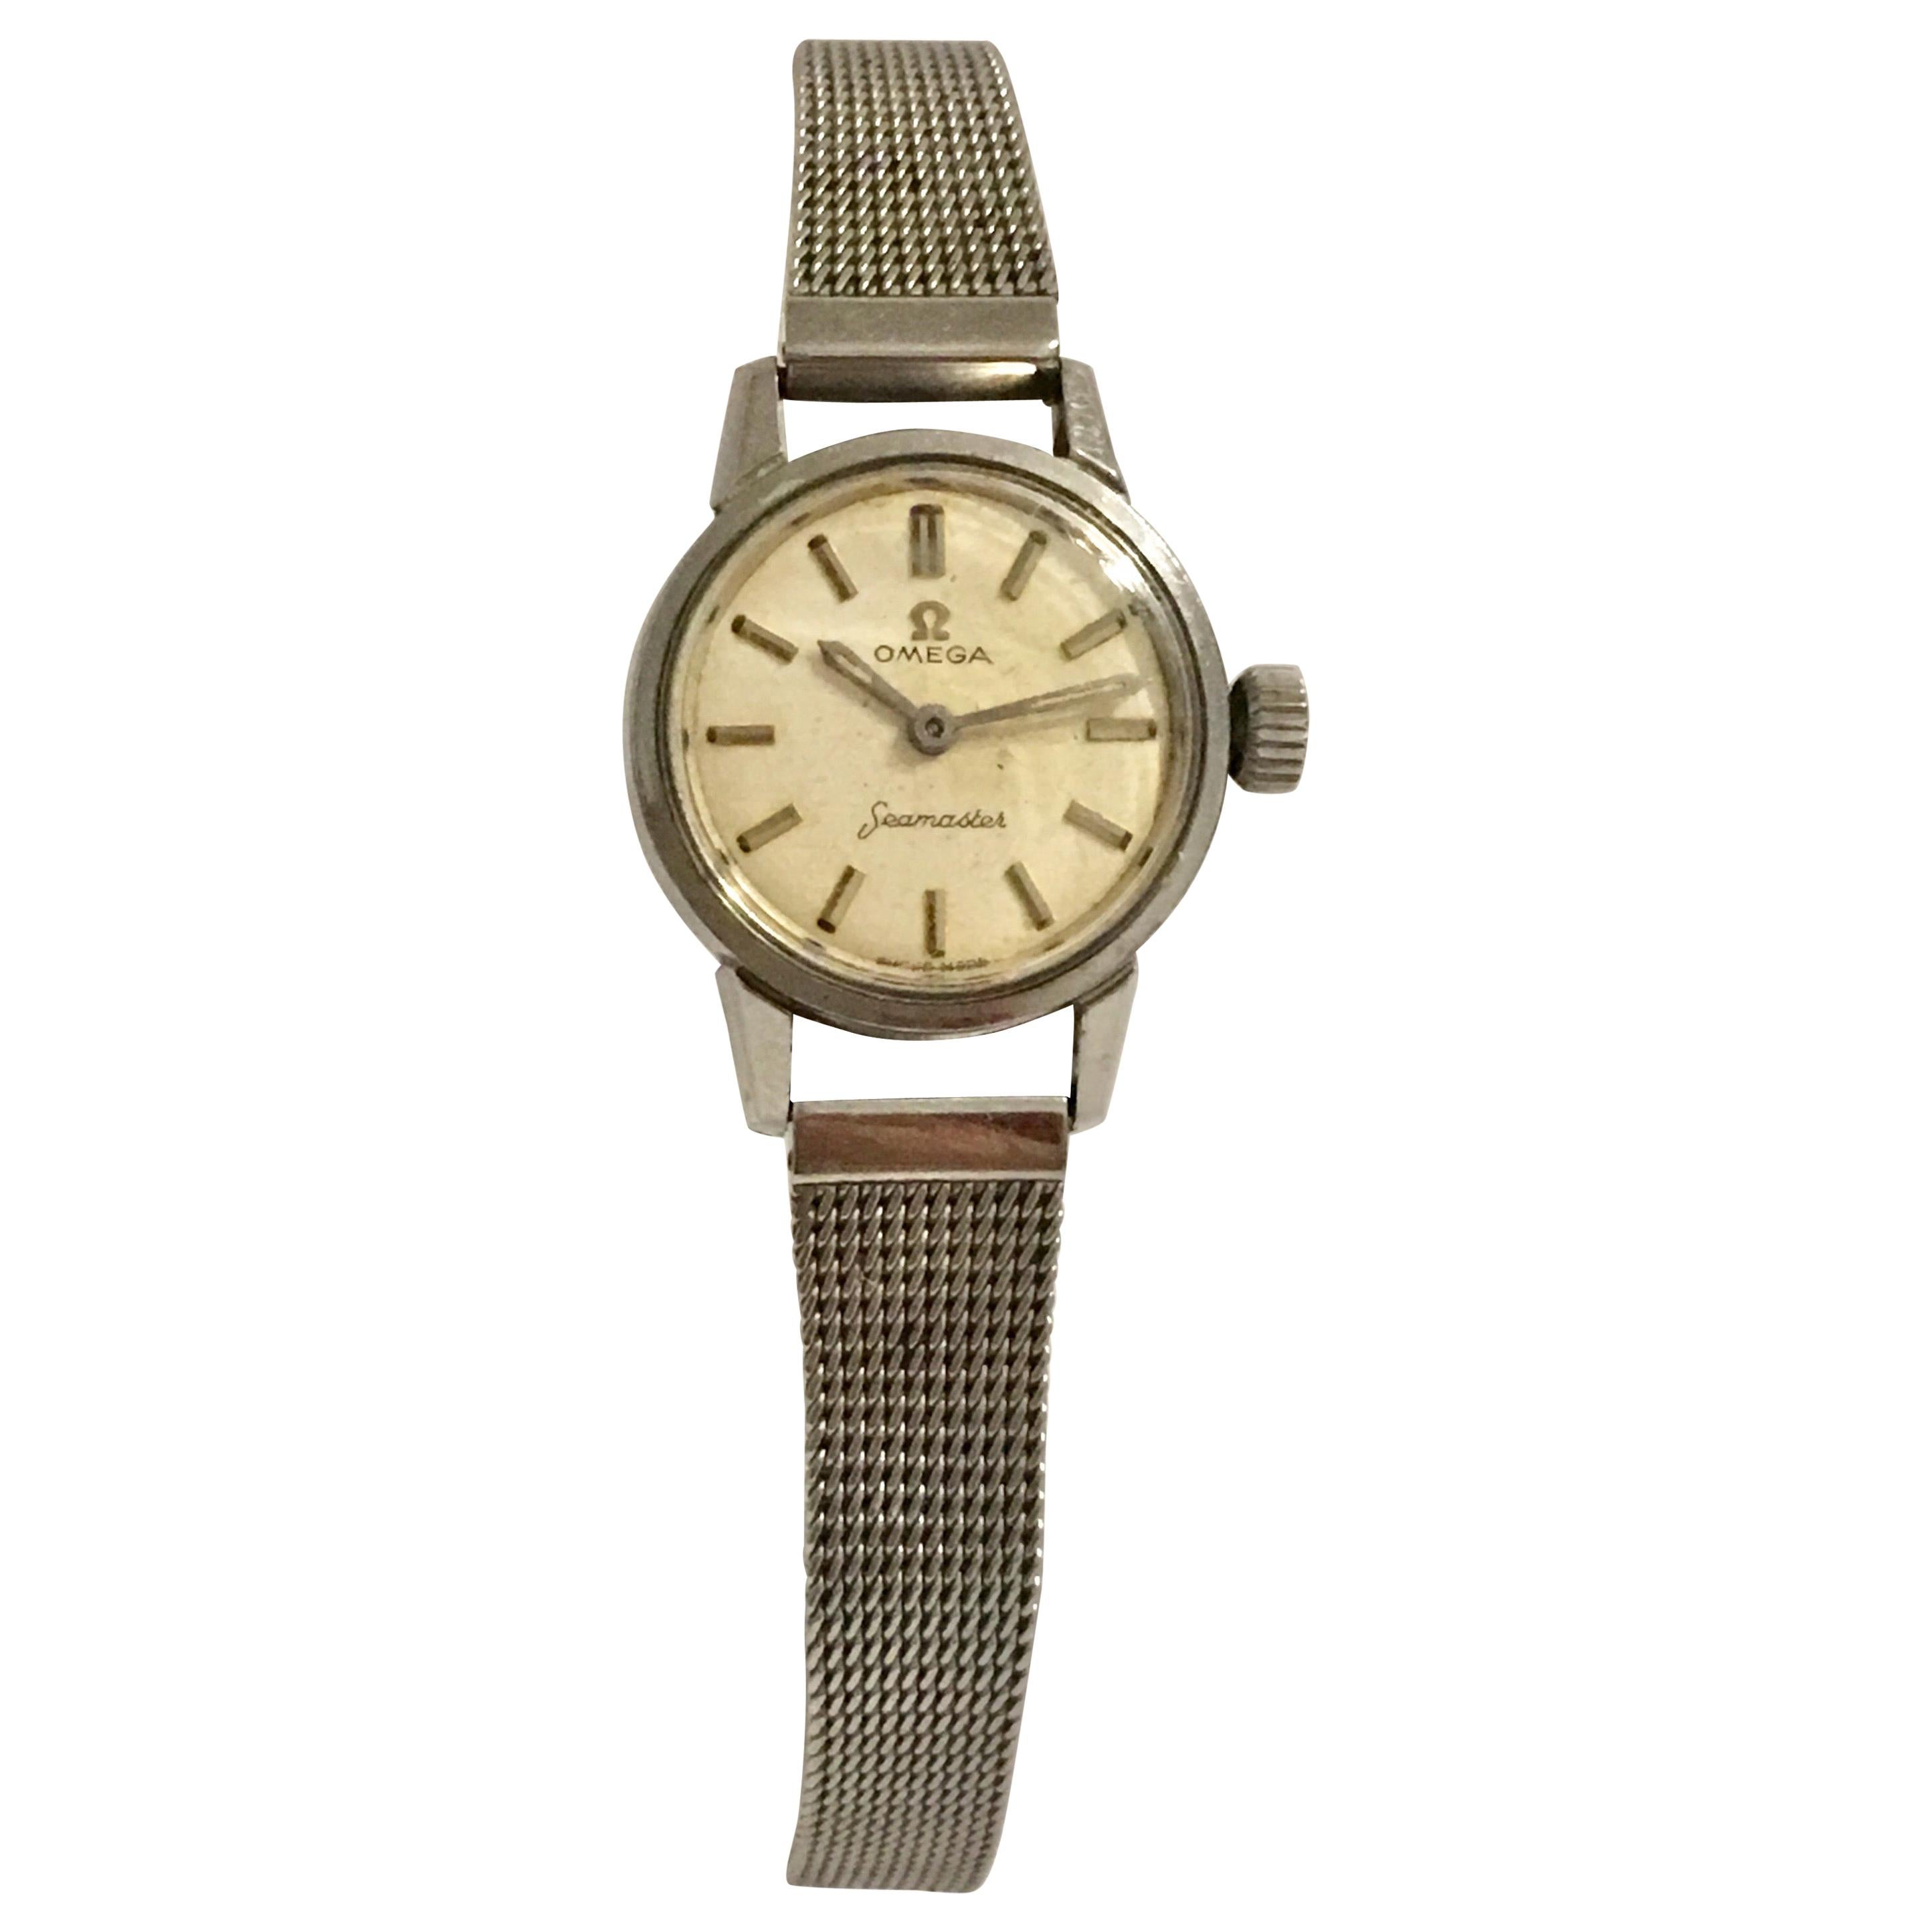 second hand omega women's watches